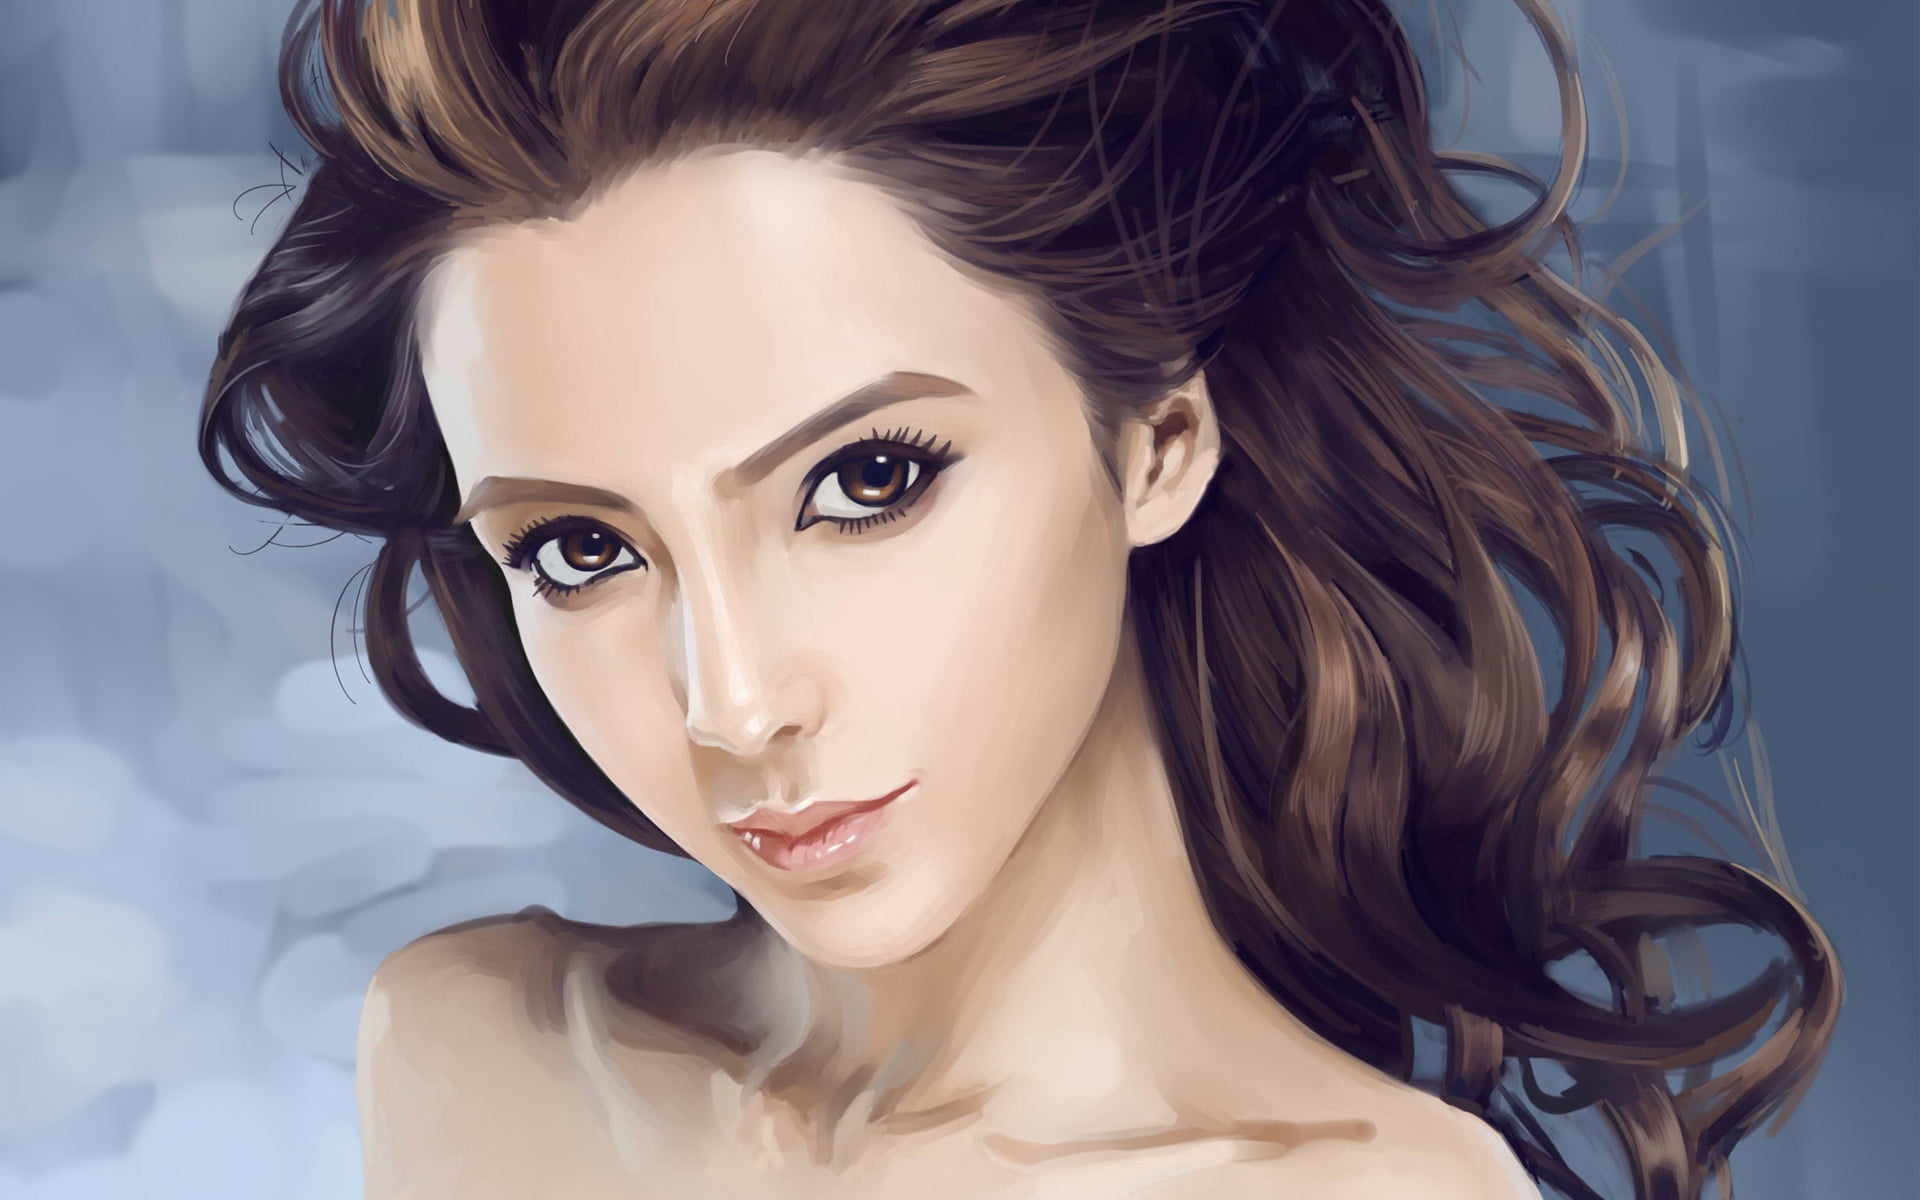 girl with brown hair illustration, art, face, eyes, portrait